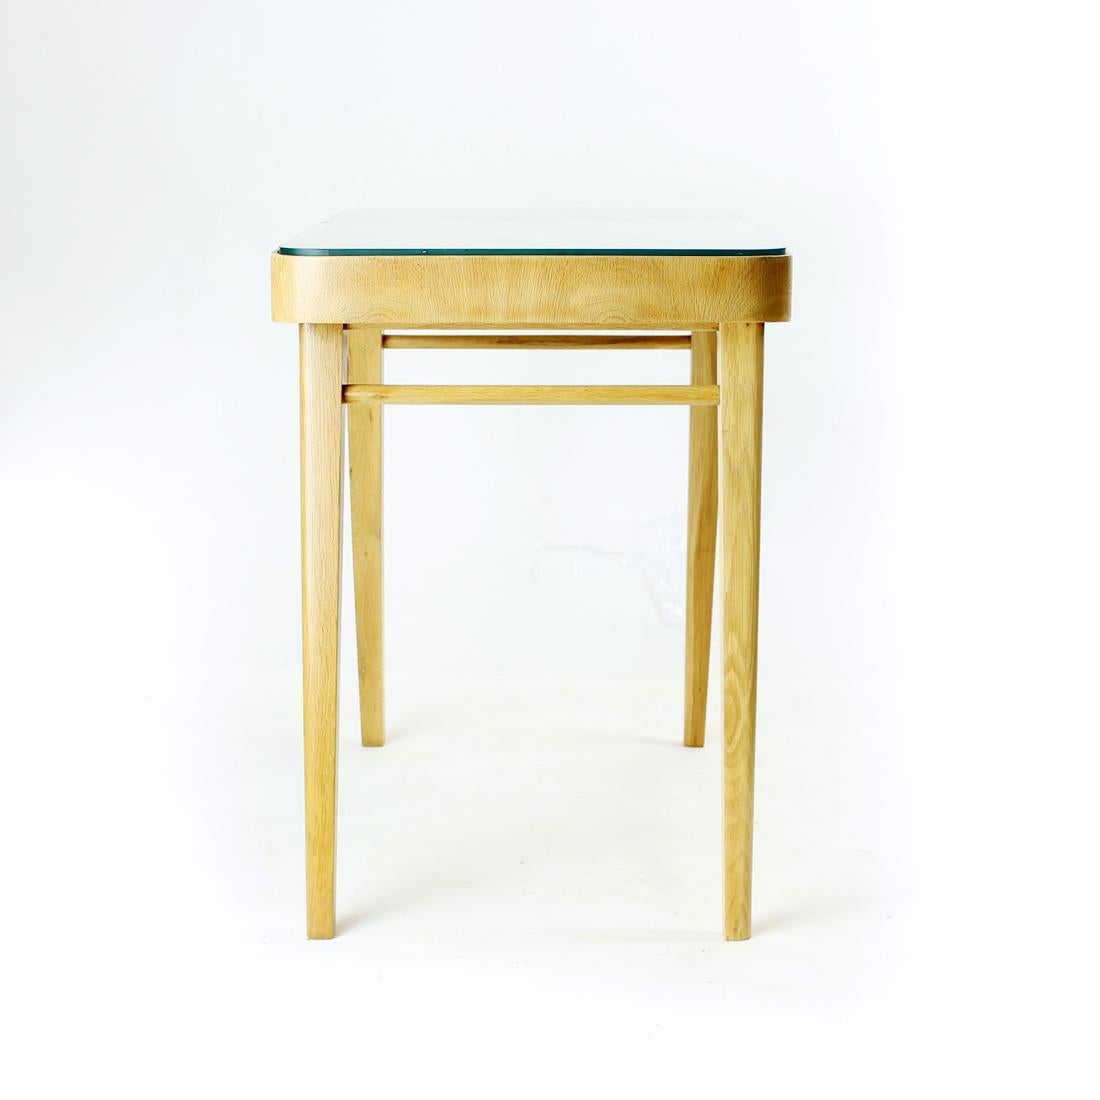 Midcentury Coffee Table in Oak and Glass, Czechoslovakia, 1960s For Sale 4